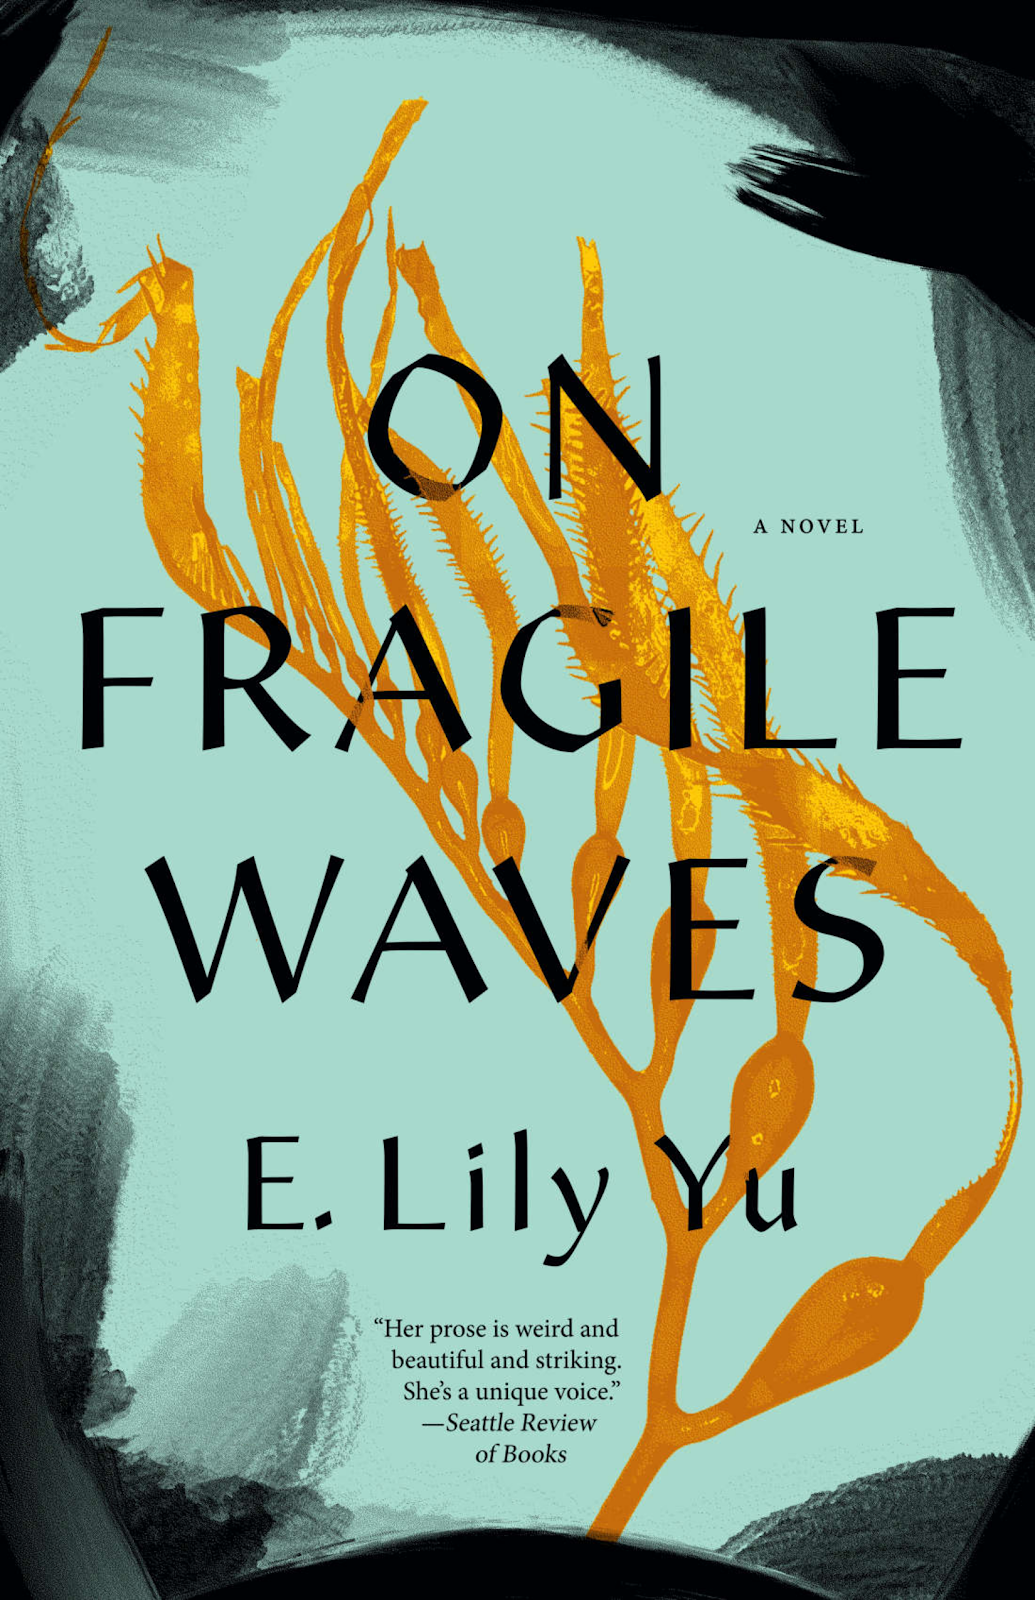 E. Lily Yu: On Fragile Waves (2020, Erewhon Books)